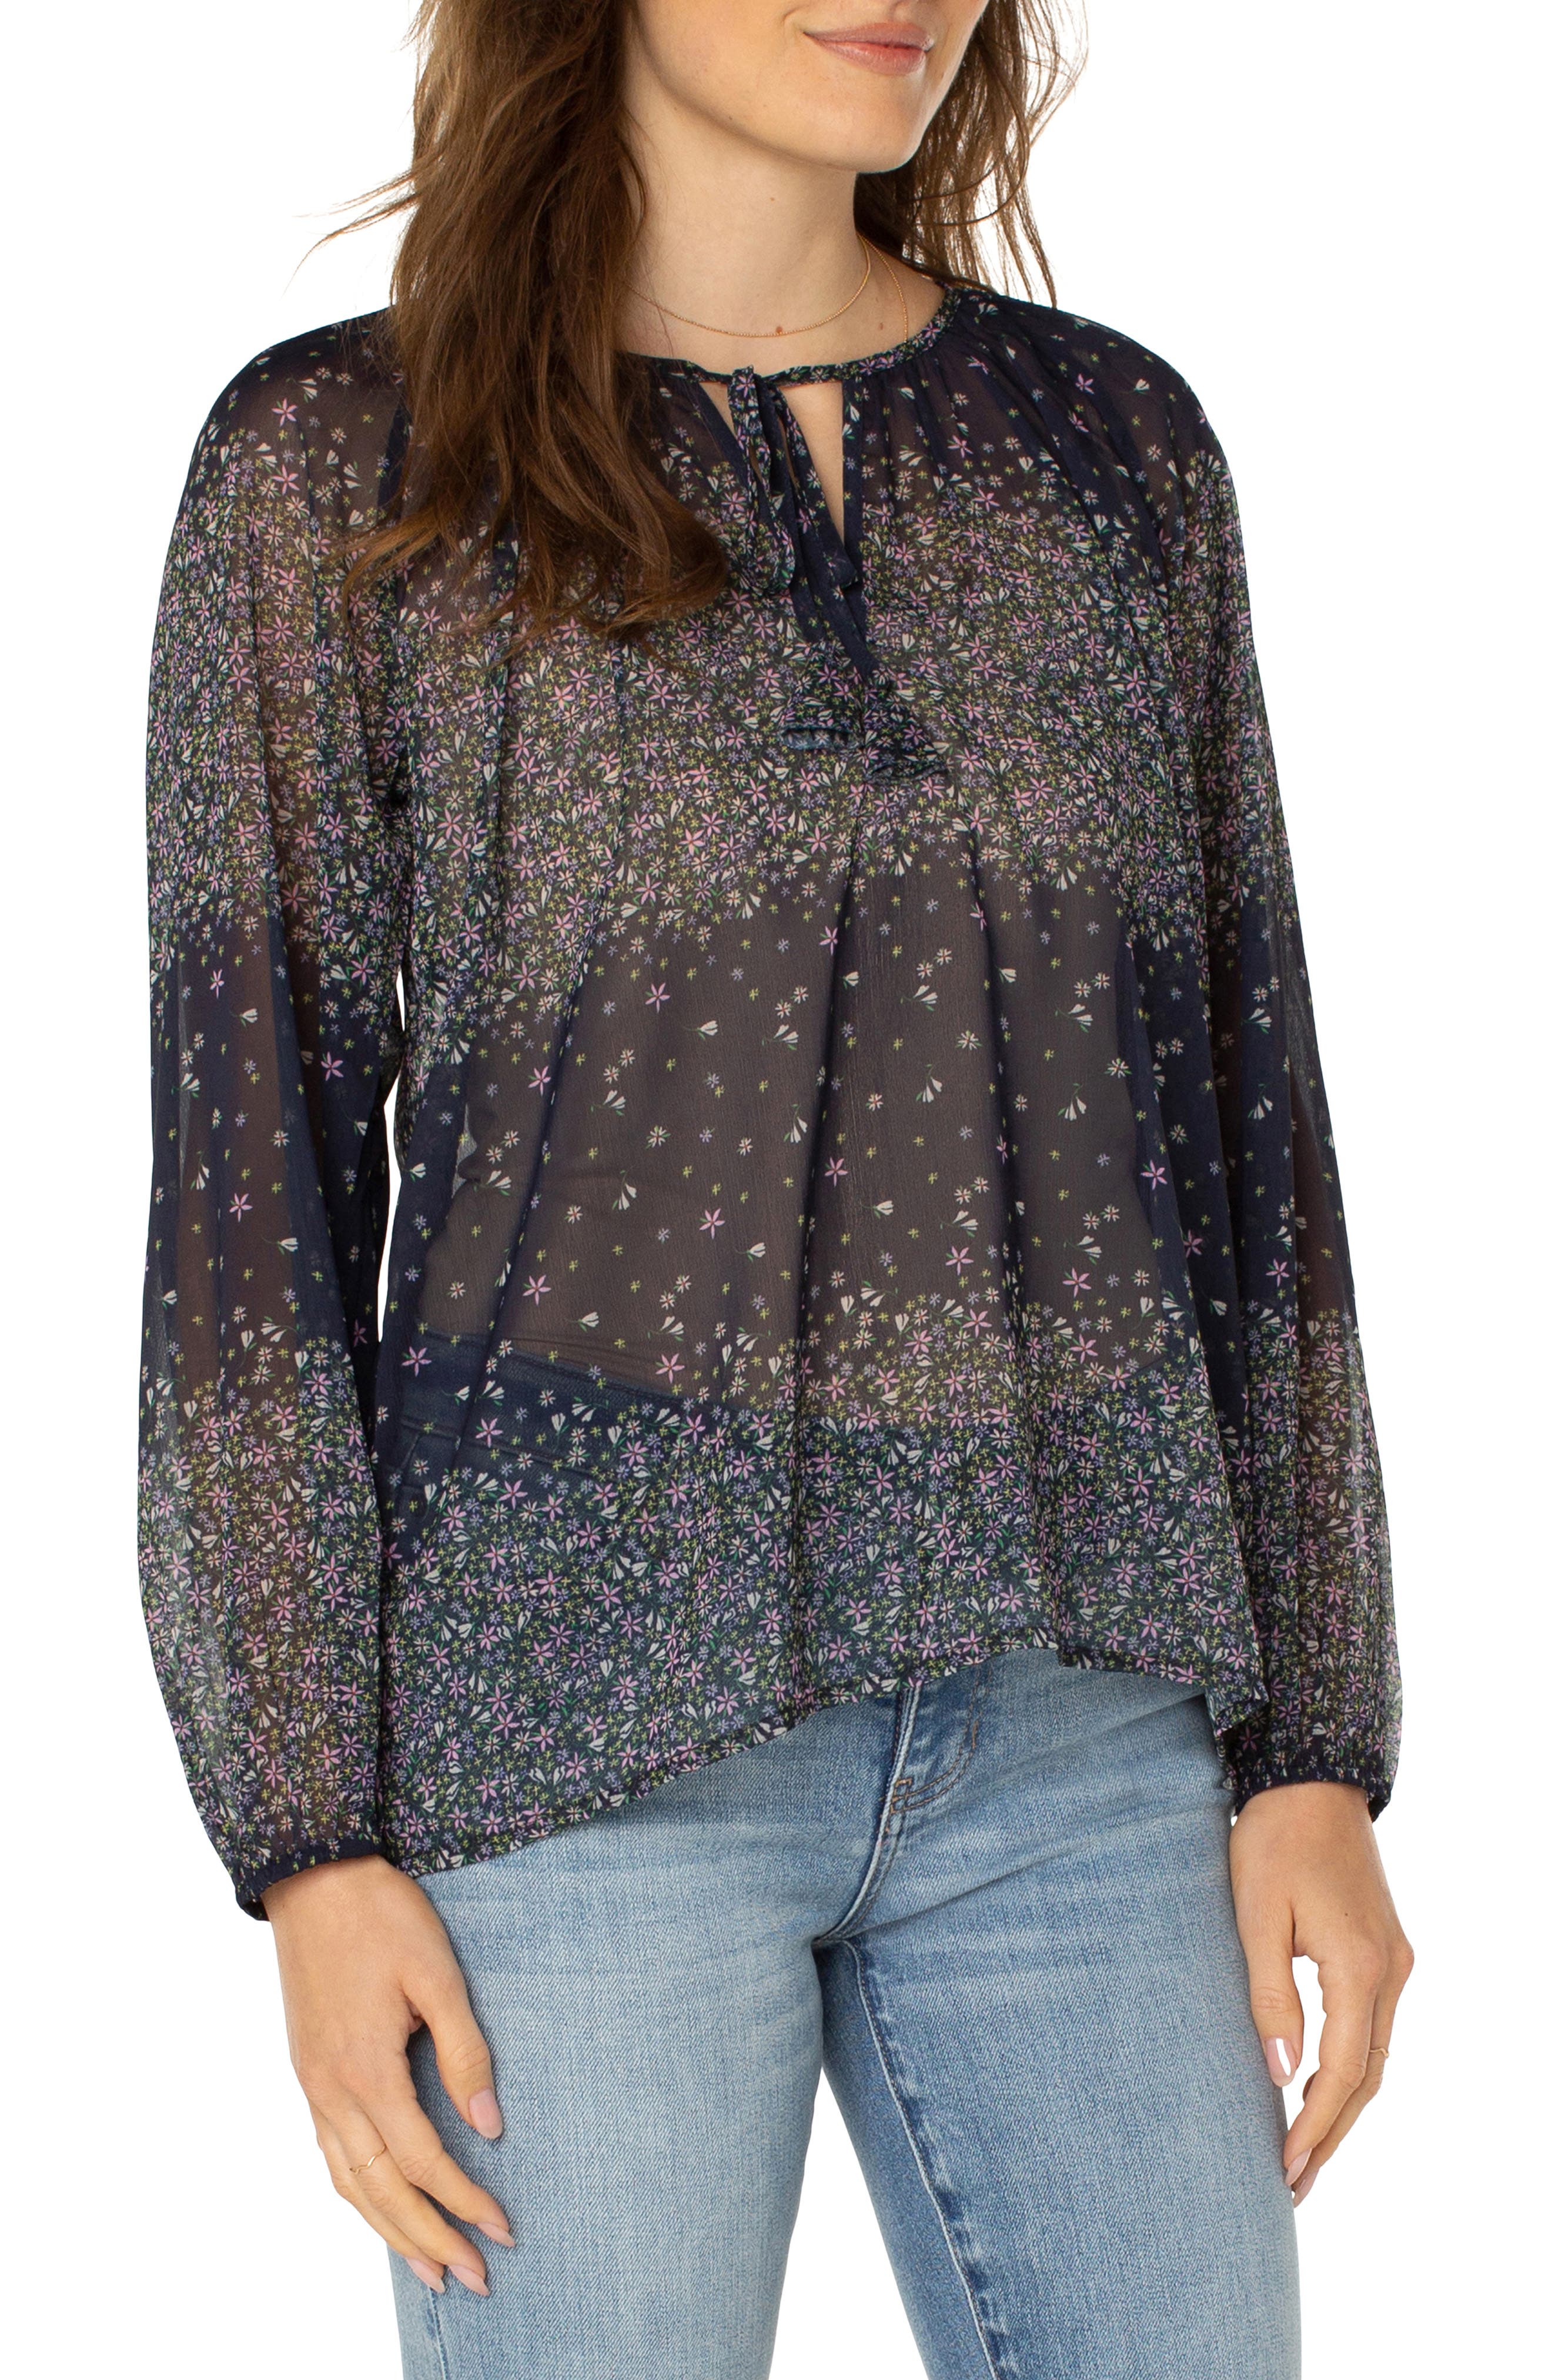 Liverpool Los Angeles Floral Print Keyhole Chiffon Top in Mdnght